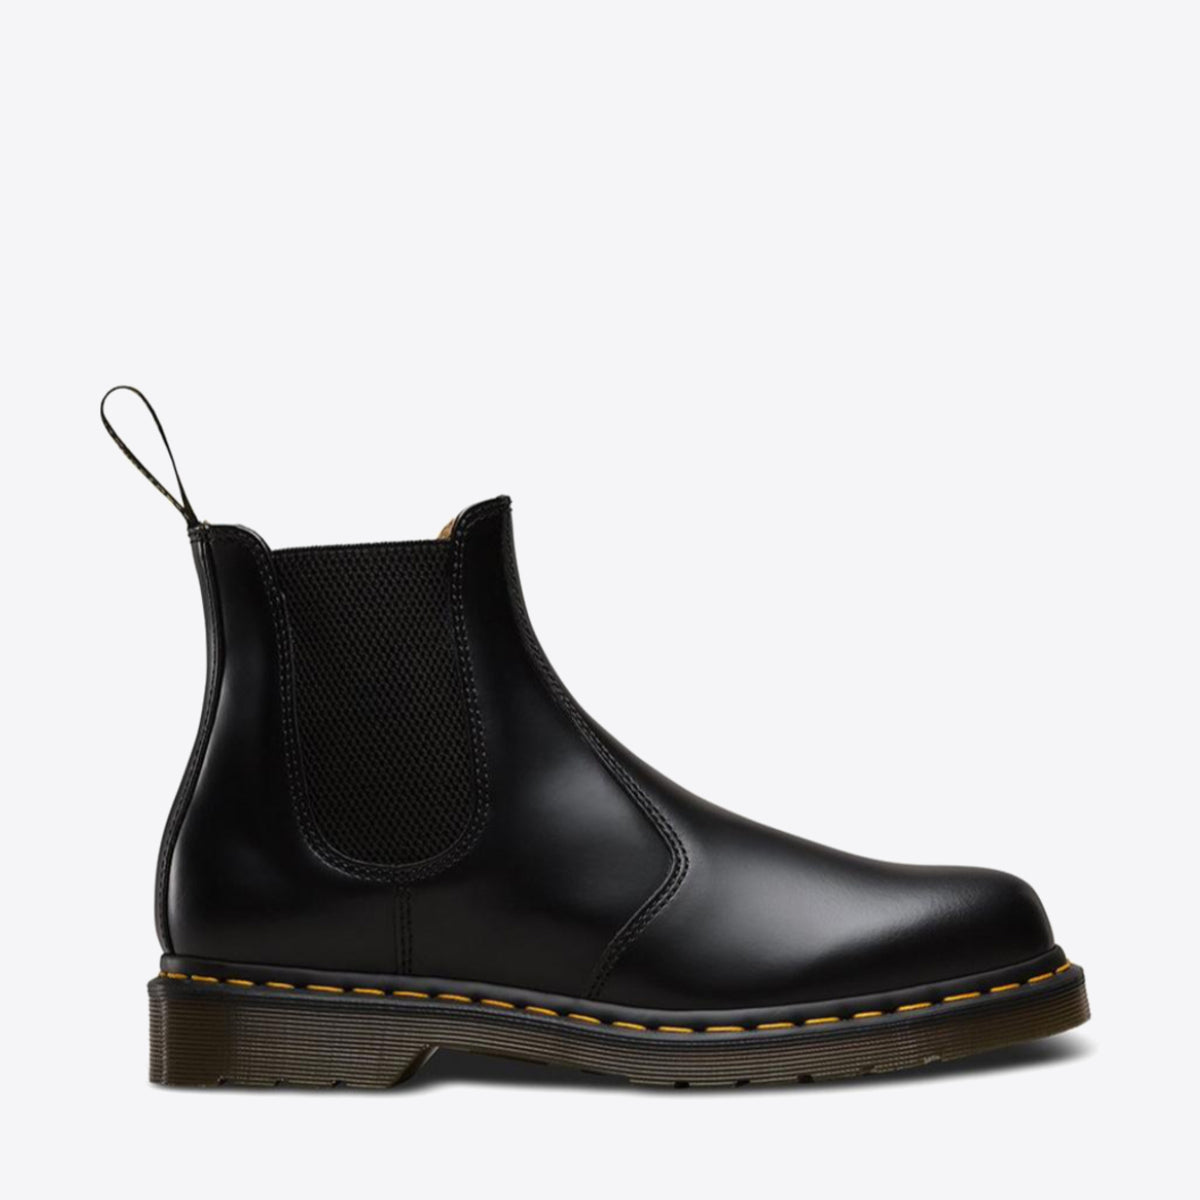  2976 Yellow Stitch Chelsea Boots Black Smooth